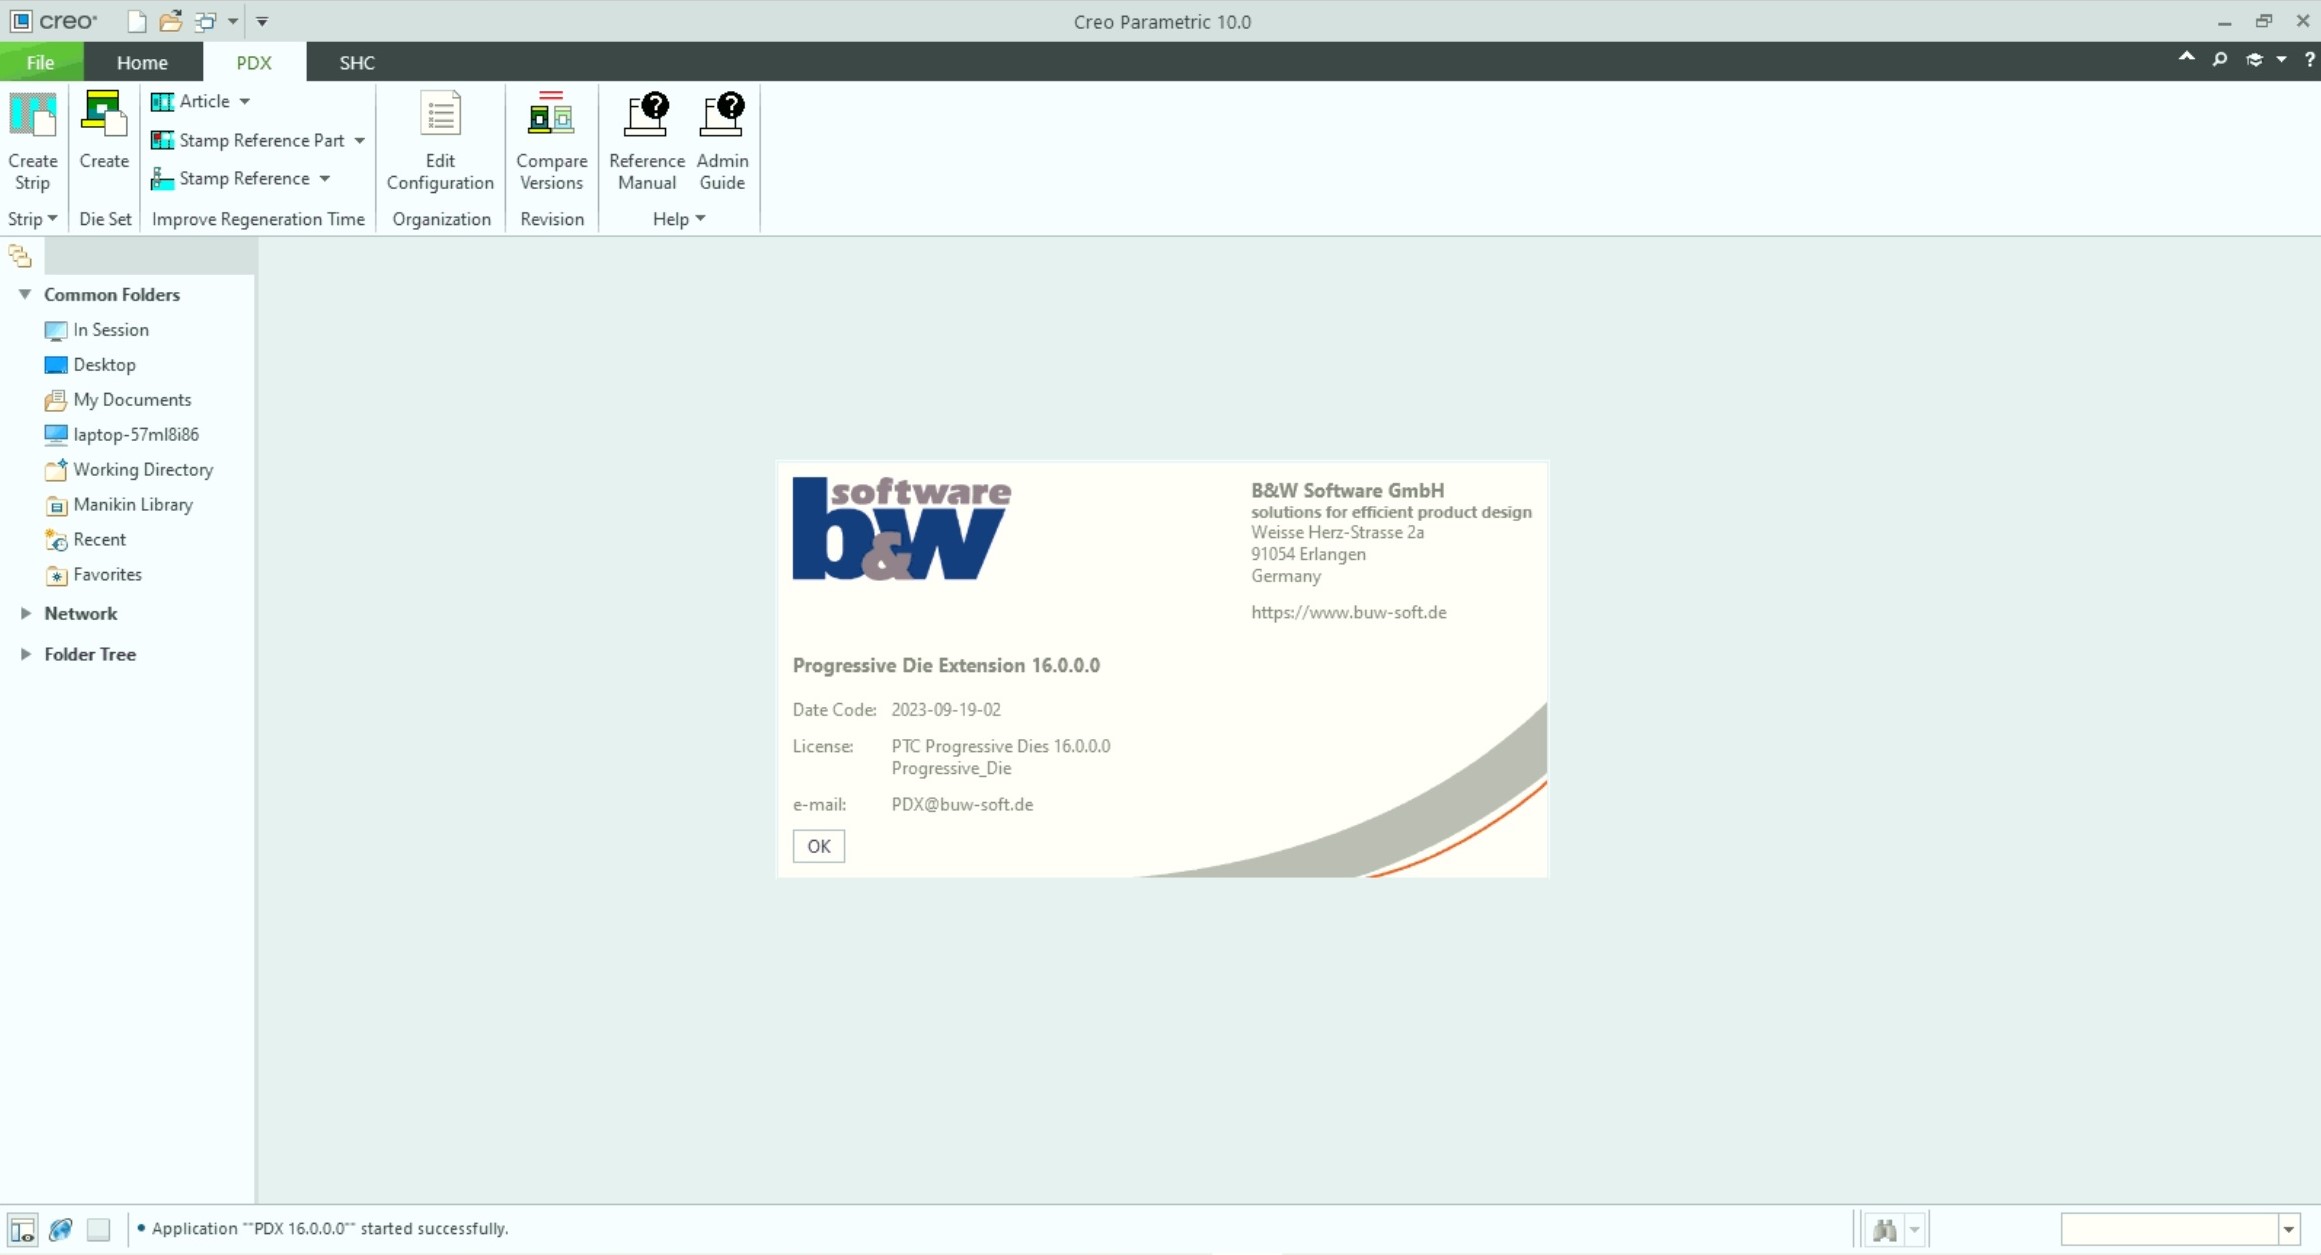 Working with BUW PDX (Progressive Die Extentions) 16.0.0.0 for Creo Parametric 4.0.x-10.0.x full